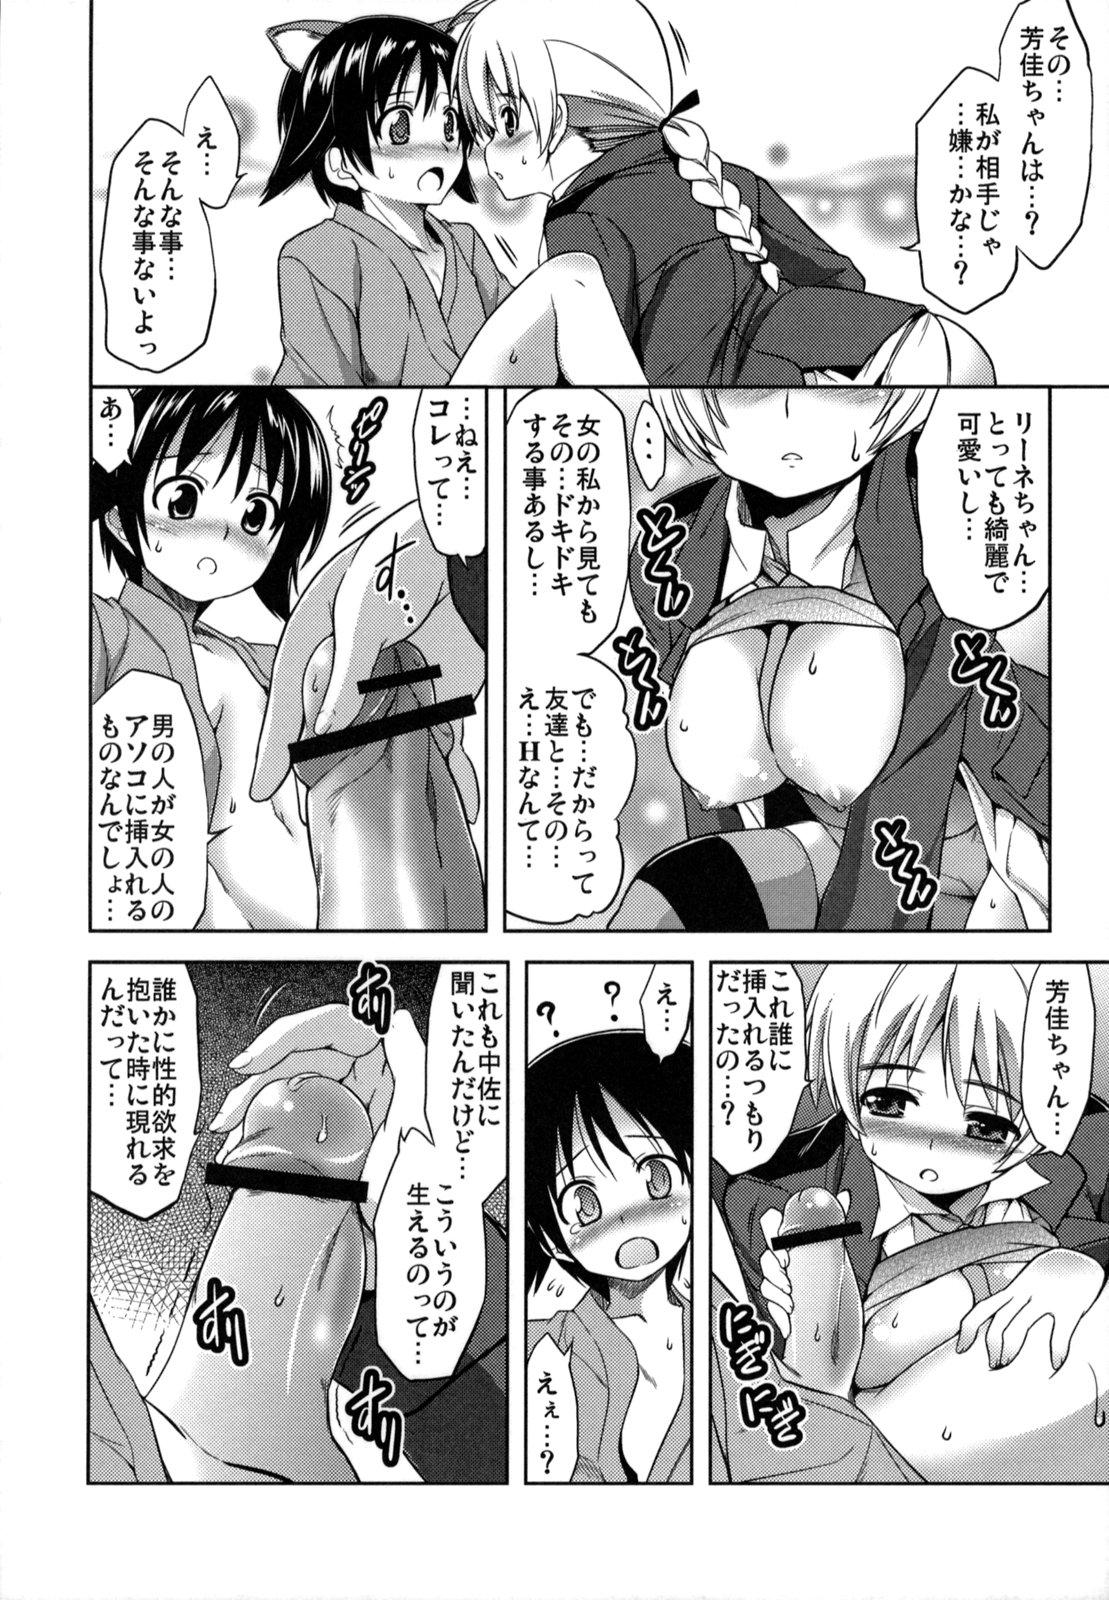 Shaking GL WITCHES - Strike witches Hardcore Fuck - Page 5